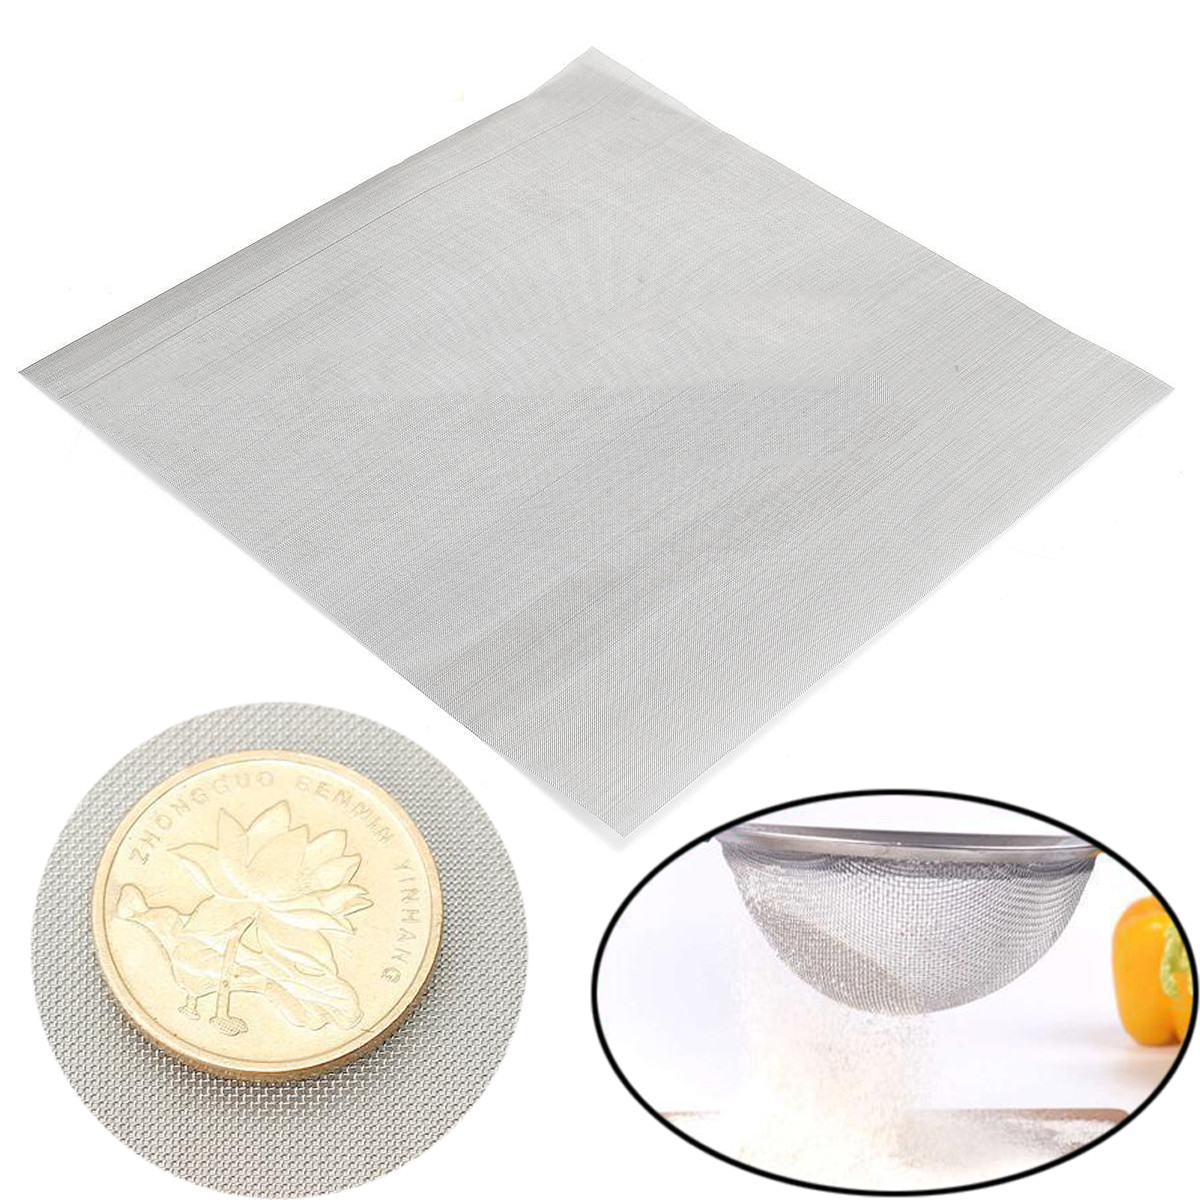 China Stainless Steel Tank Filter Inlet Box Mesh Shrimp Net Kit Special Shrimp Tank Filter Inlet Aquarium Accessories factory